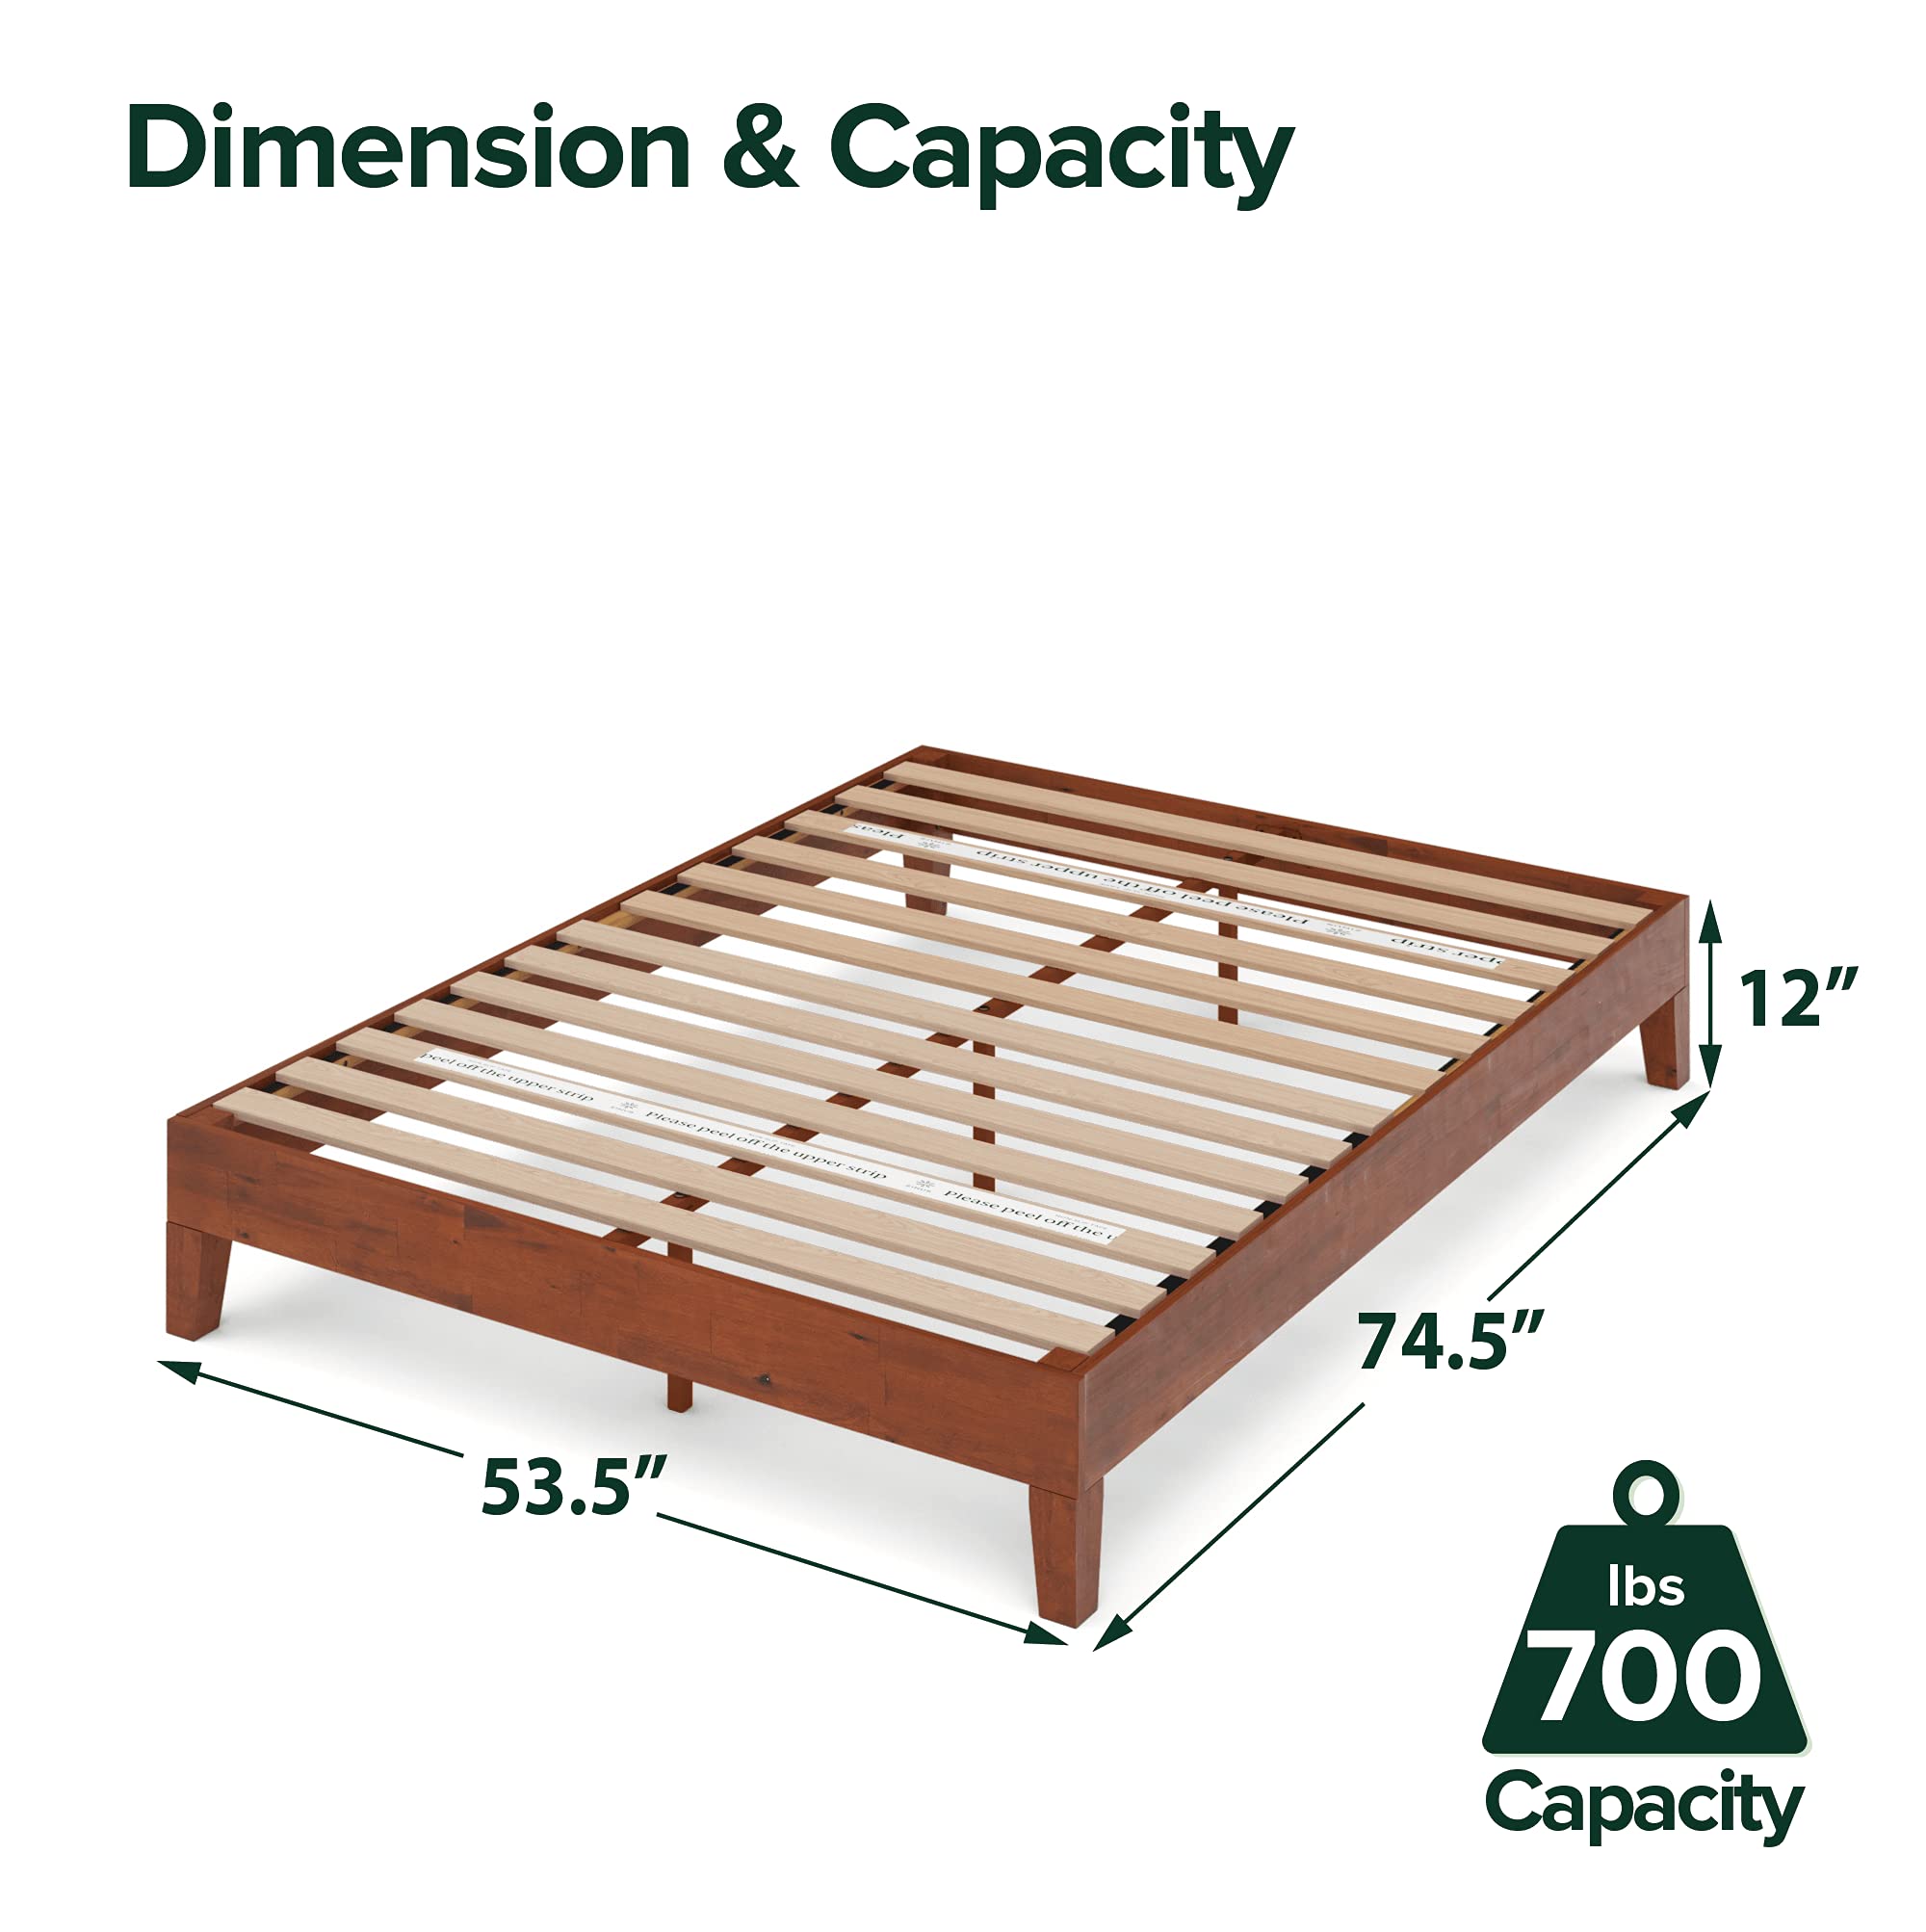 ZINUS Wen Deluxe Wood Platform Bed Frame / Solid Wood Foundation / Wood Slat Support / No Box Spring Needed / Easy Assembly, Full